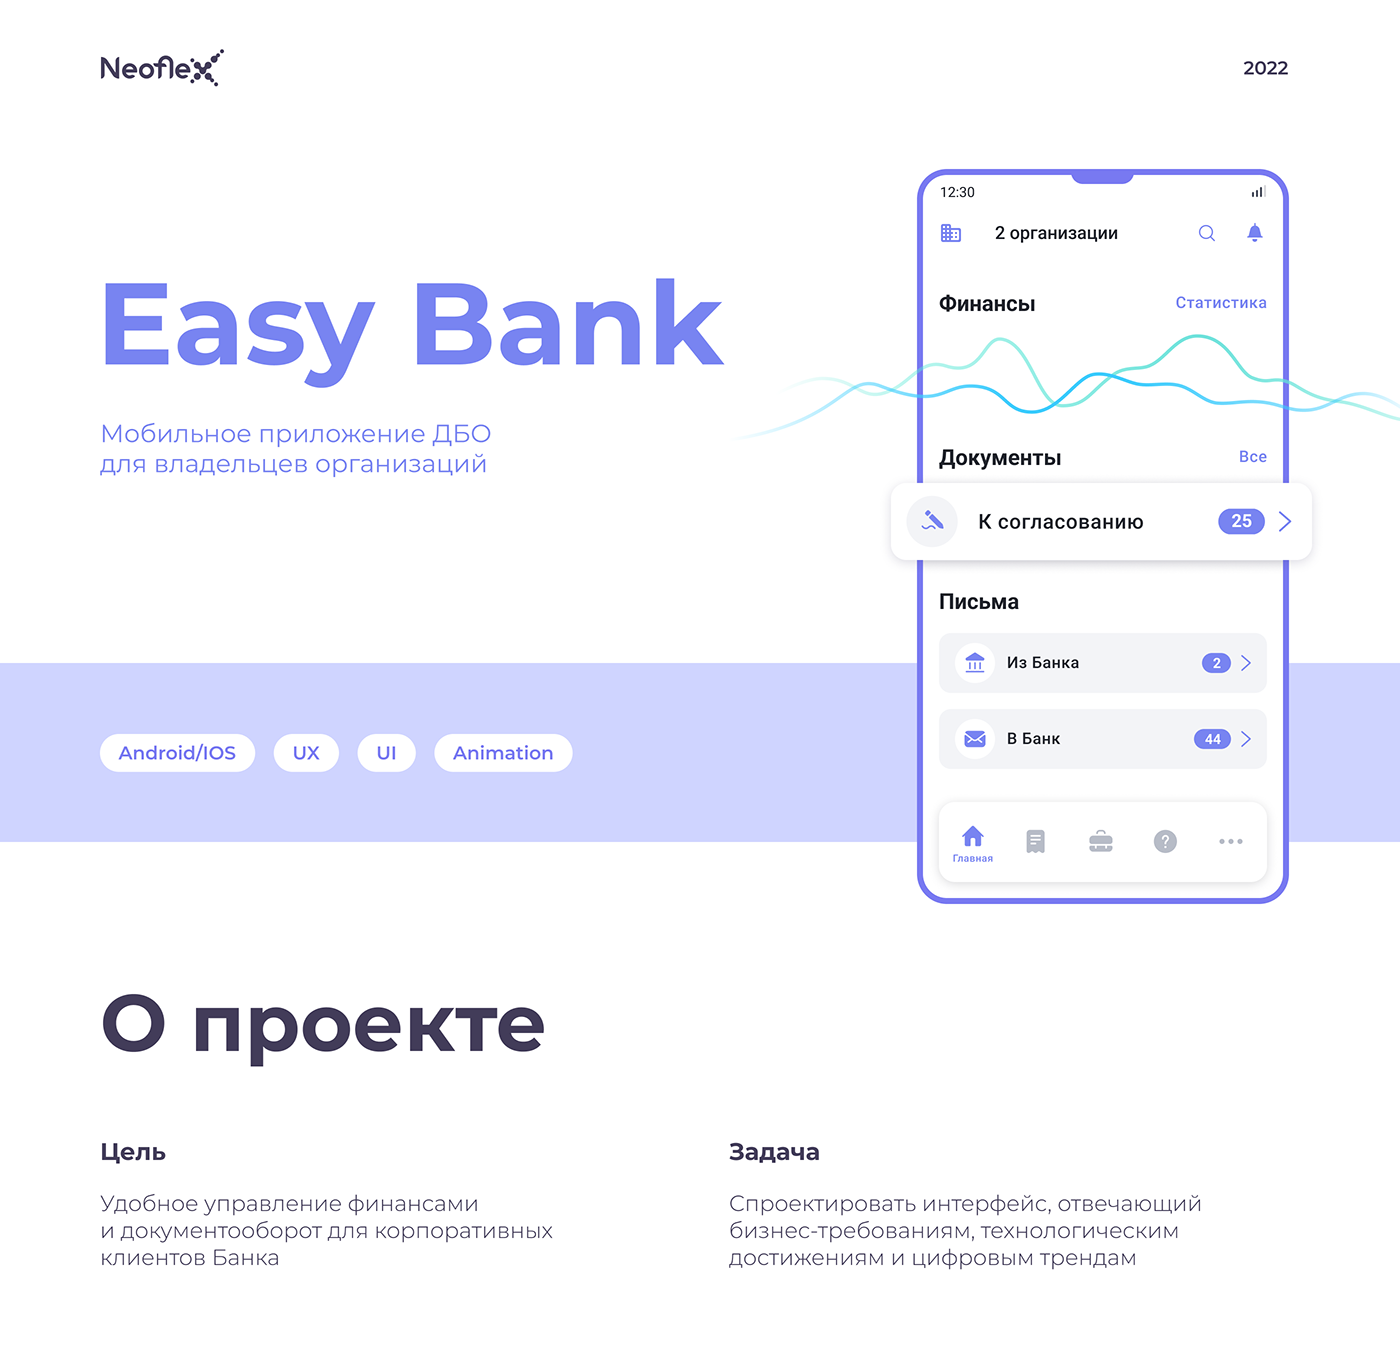 app design Bank banking app business finance Investment user experience user interface UX design